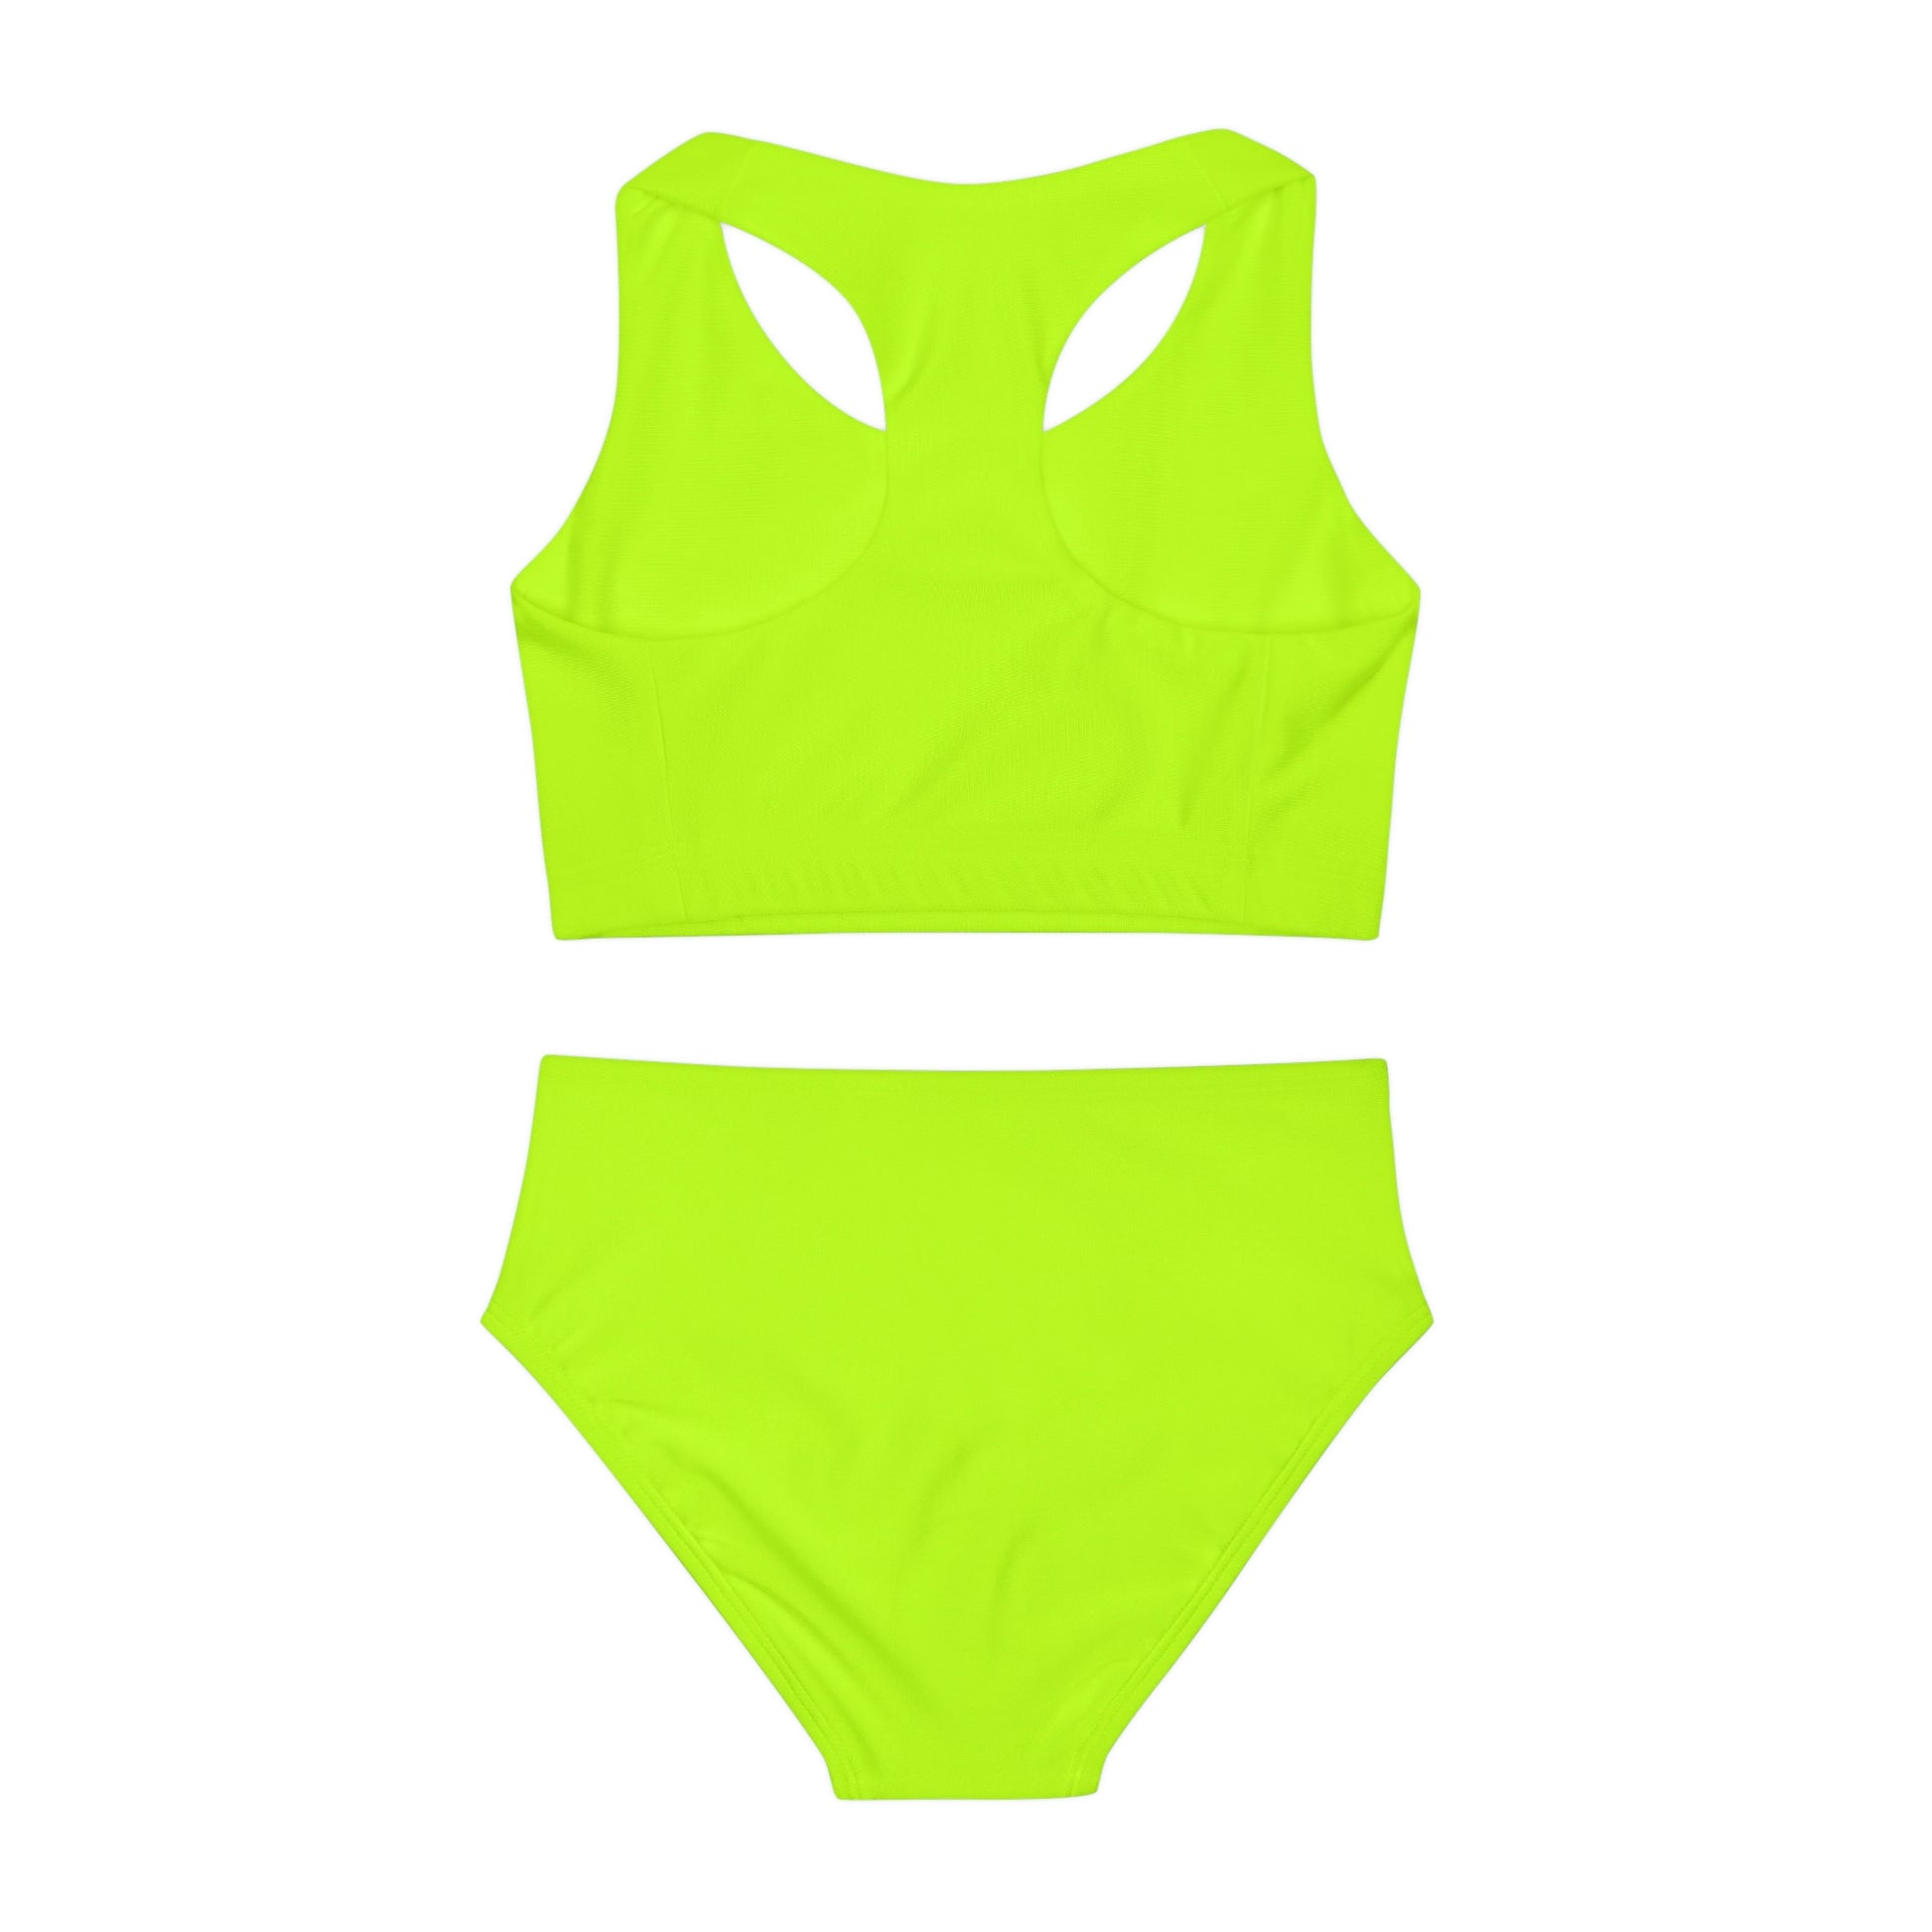 Little Kids neon green two piece swimsuit LifeBrite Active girls neon clothing girls neon clothes girls neon swimming girls neon activewear girls neon bathing suit kids neon swim childrens neon swimwear toddler neon clothing toddler neon clothes toddler neon swimming toddler neon activewear kids neon swim childrens neon swimwear toddler neon bathing suit childrens neon clothing childrens neon clothes childrens neon swimming kids neon swim childrens neon swimwear childrens neon bathing suit